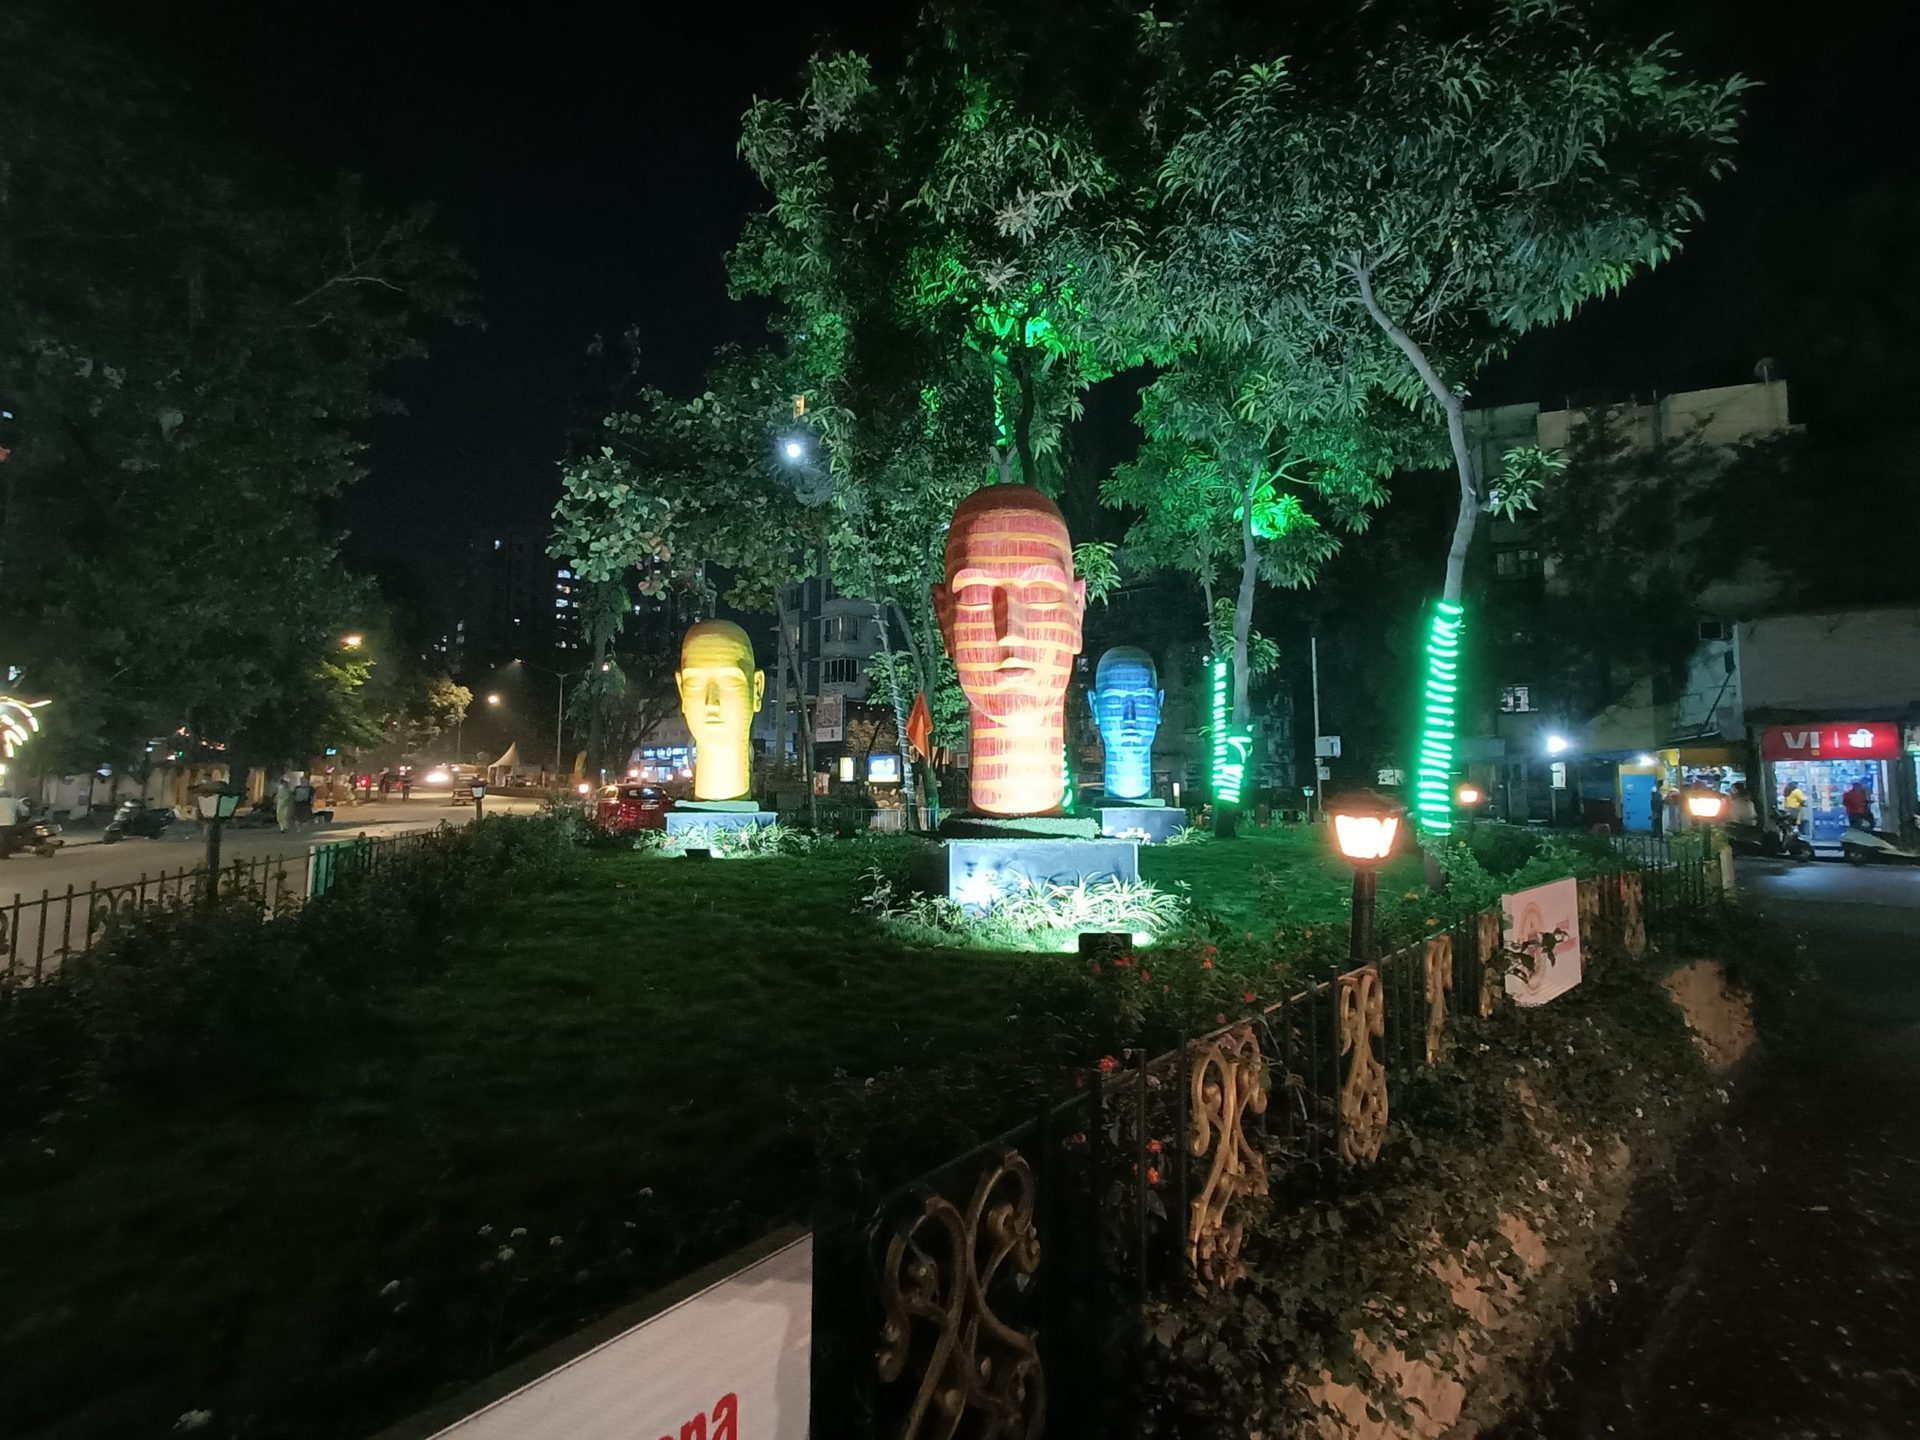 oppo reno 7 pro camera sample ultrawide image without night mode outdoors showing colorful head sculptures in a park